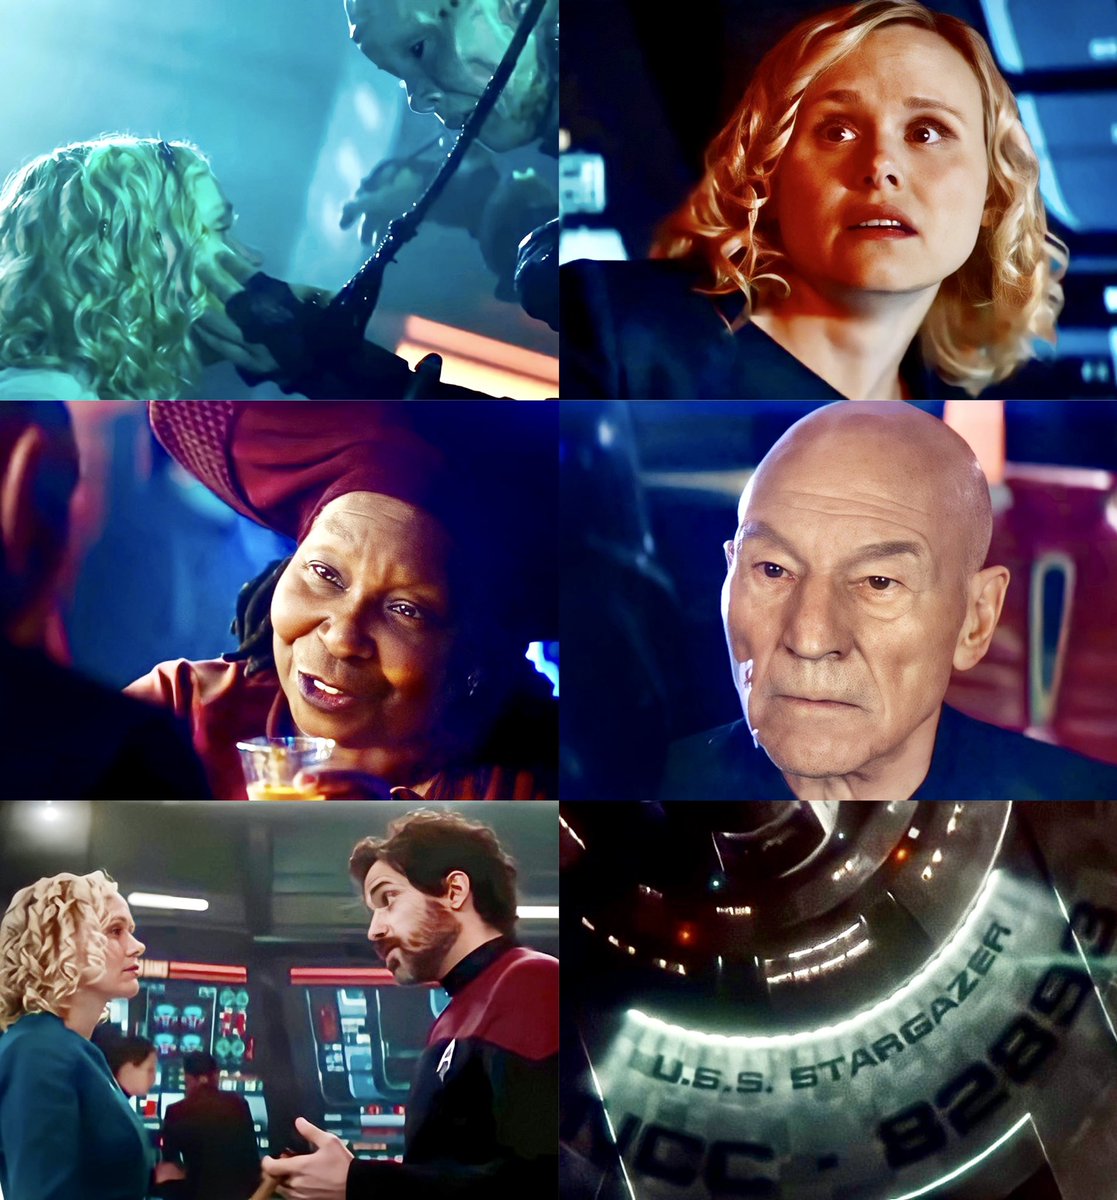 New Screen Shots from the New Startrek Picard. #StartrekPicardSeries2 #ScreenShotsPicard #NewStartrekPicard